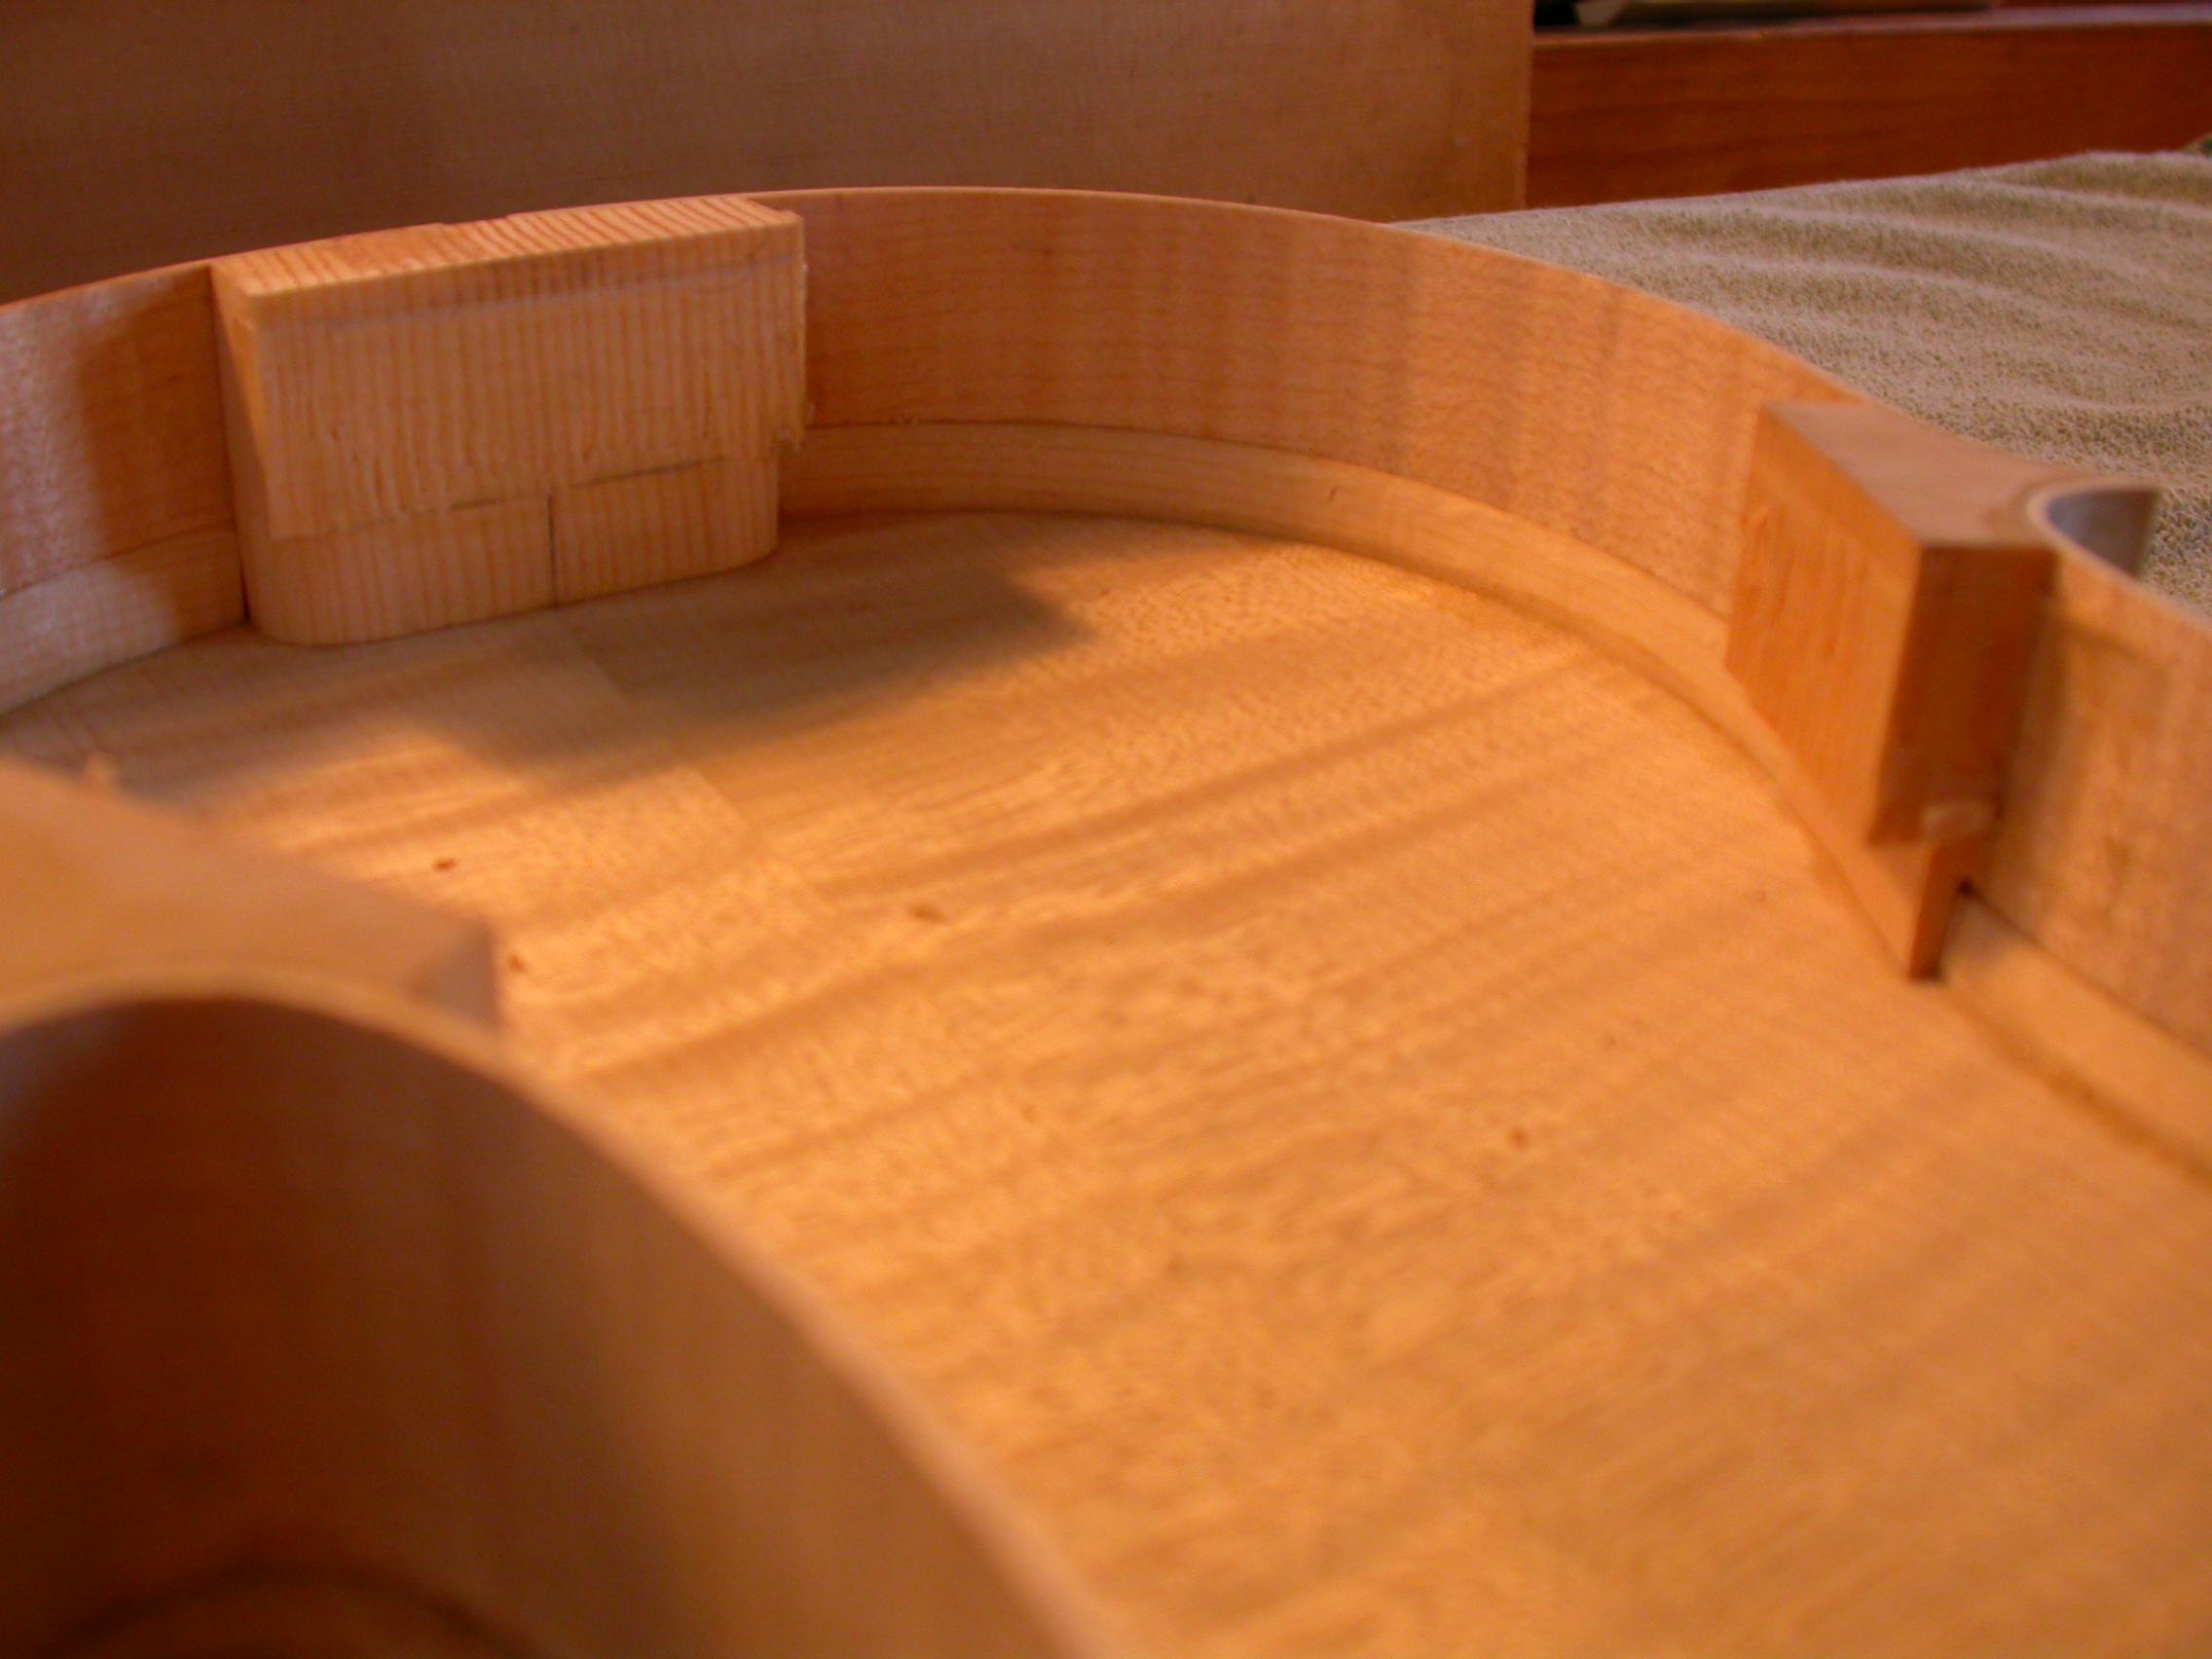 paul violin in the making wood curved craft craftsmanship instrument school